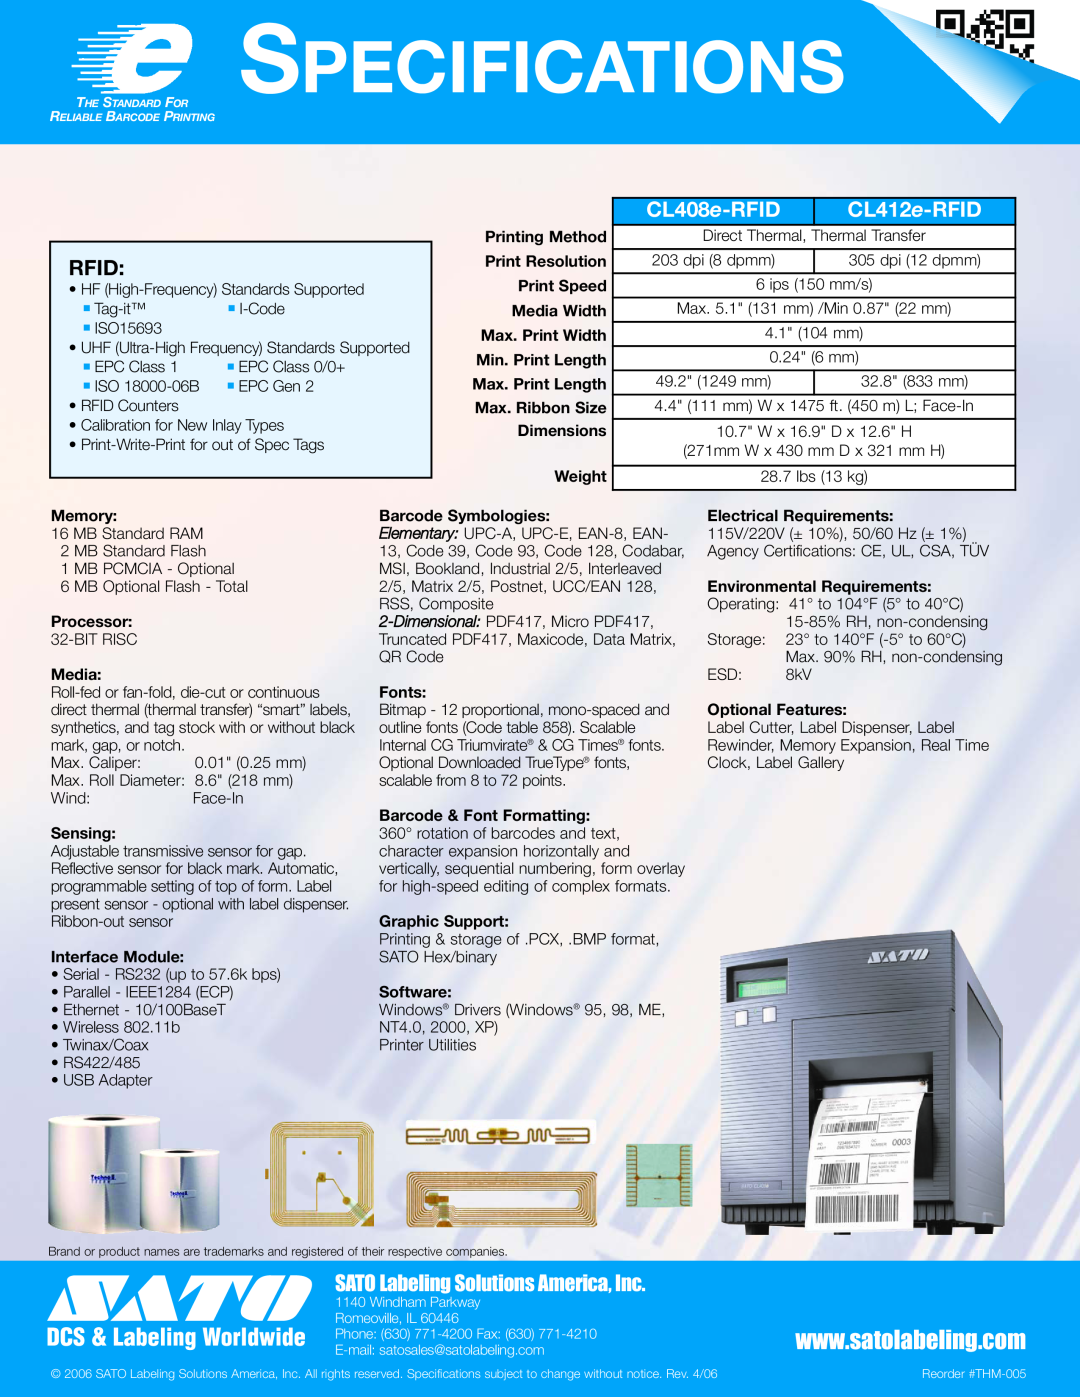 SATO CLe RFID Smart manual Rfid, Specifications, CL408e-RFID, CL412e-RFID, SATO Labeling Solutions America, Inc, Tag-it 